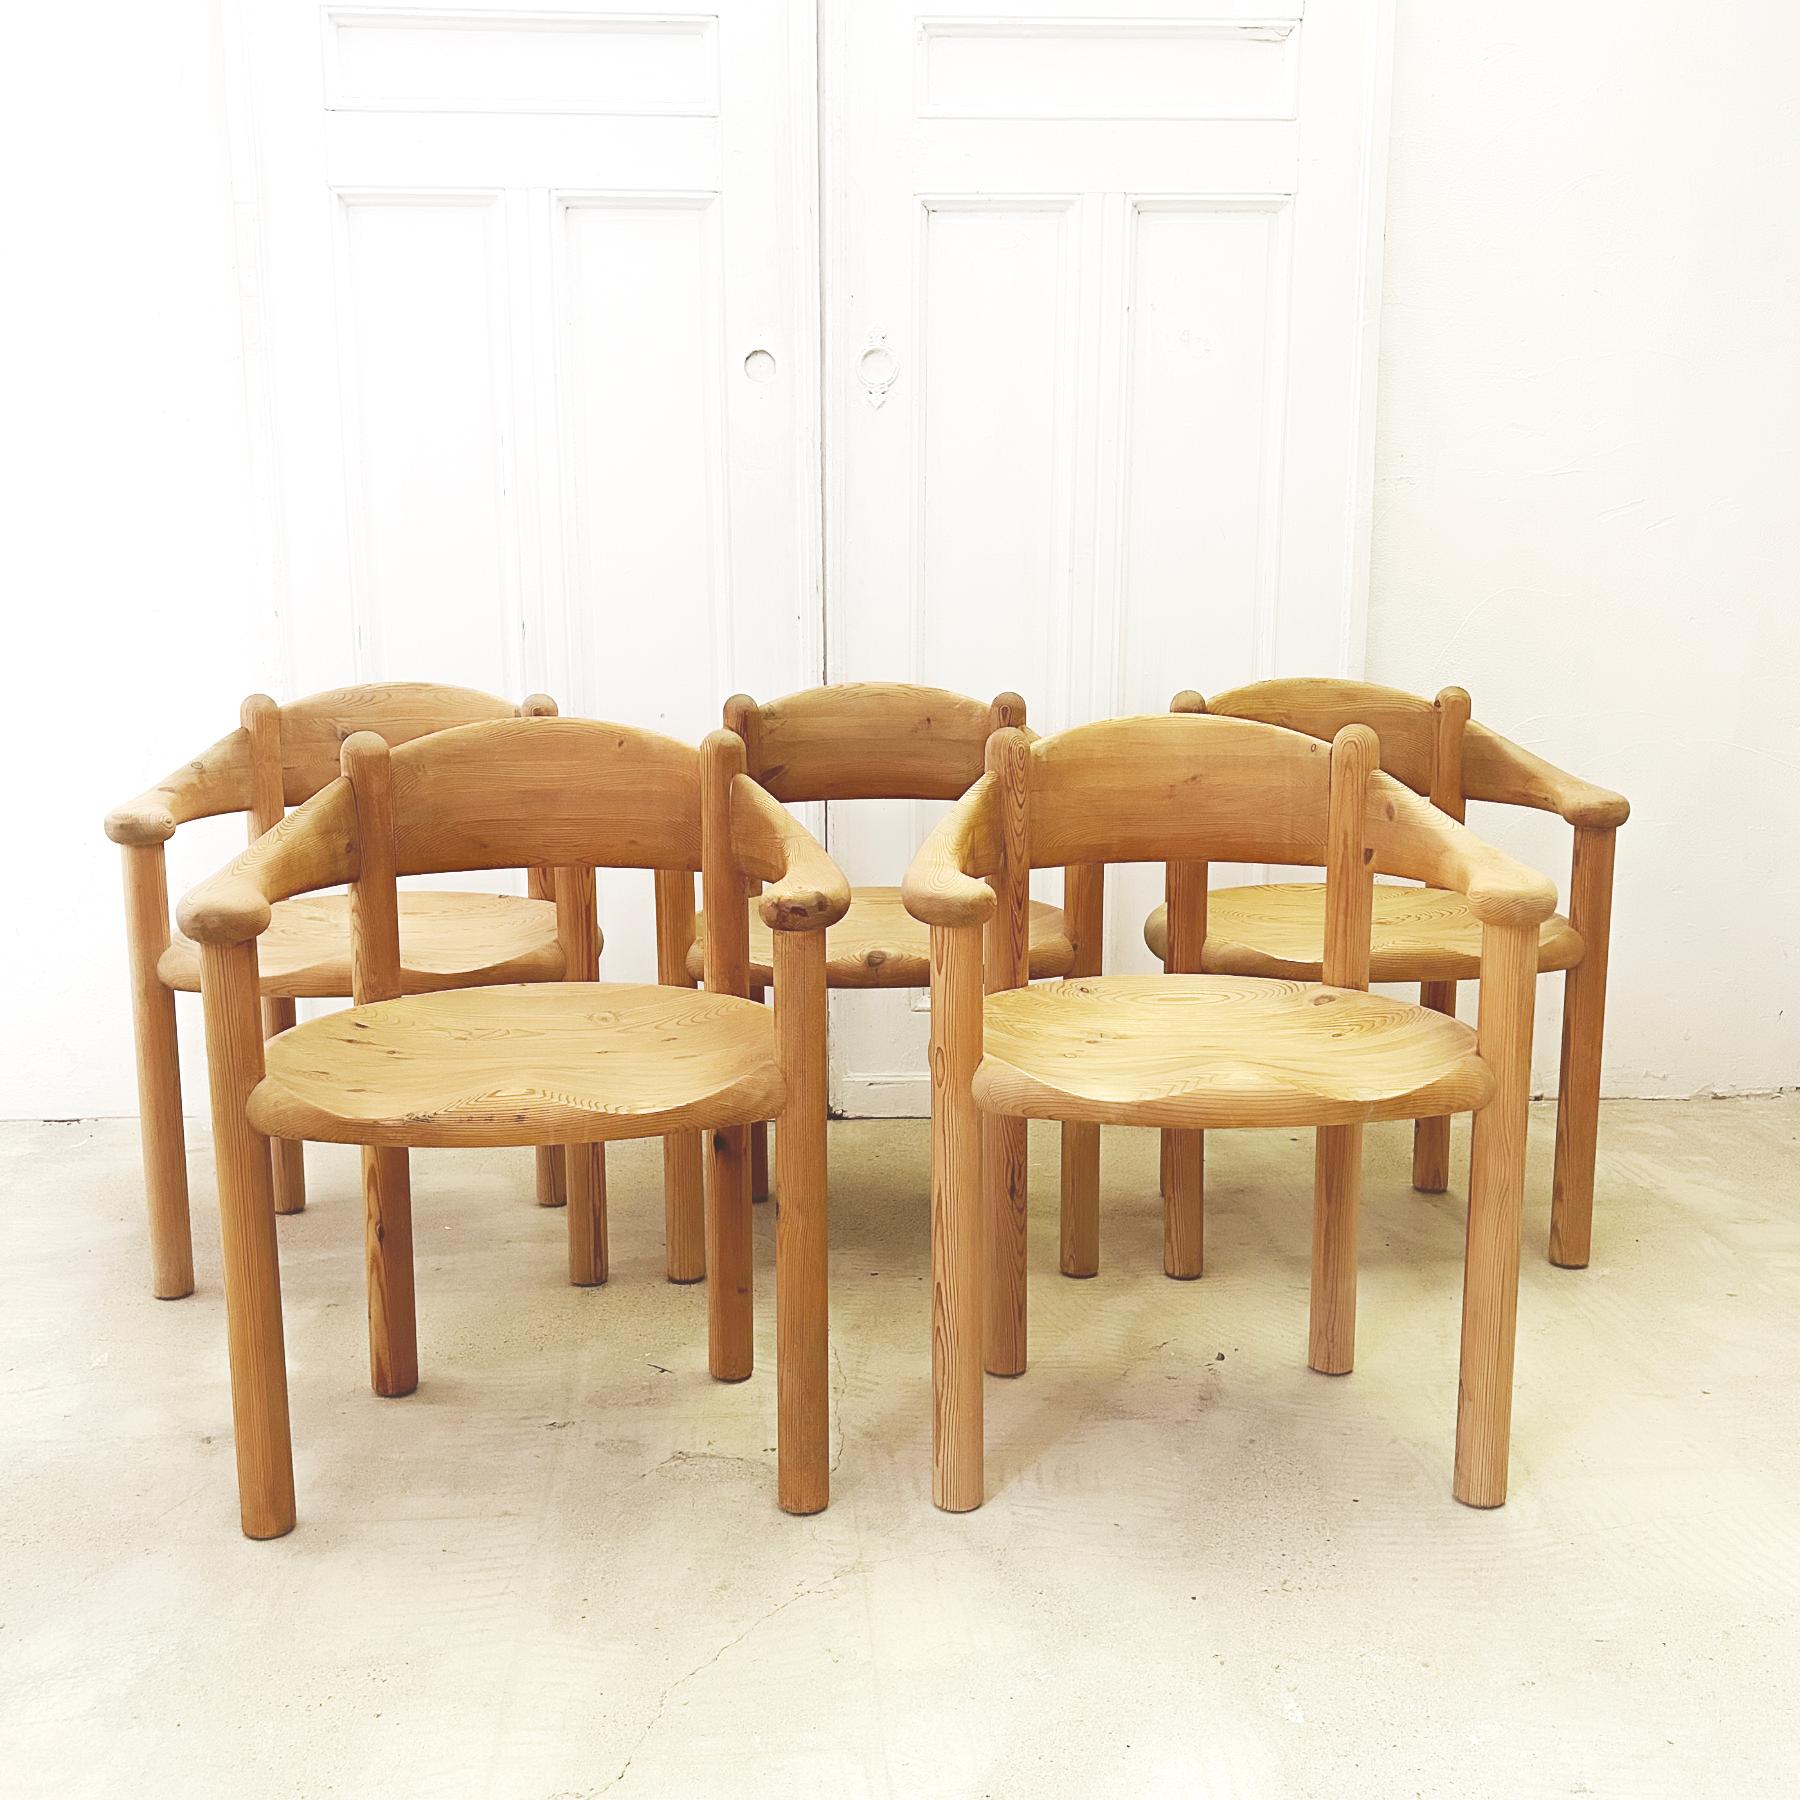 Of all the furniture designed by German born Rainer Daumiller, these pine dining chairs are most representative of his values and approach as a designer. They are solid in construction, simple in form and sculptural in expression. He had a lifelong